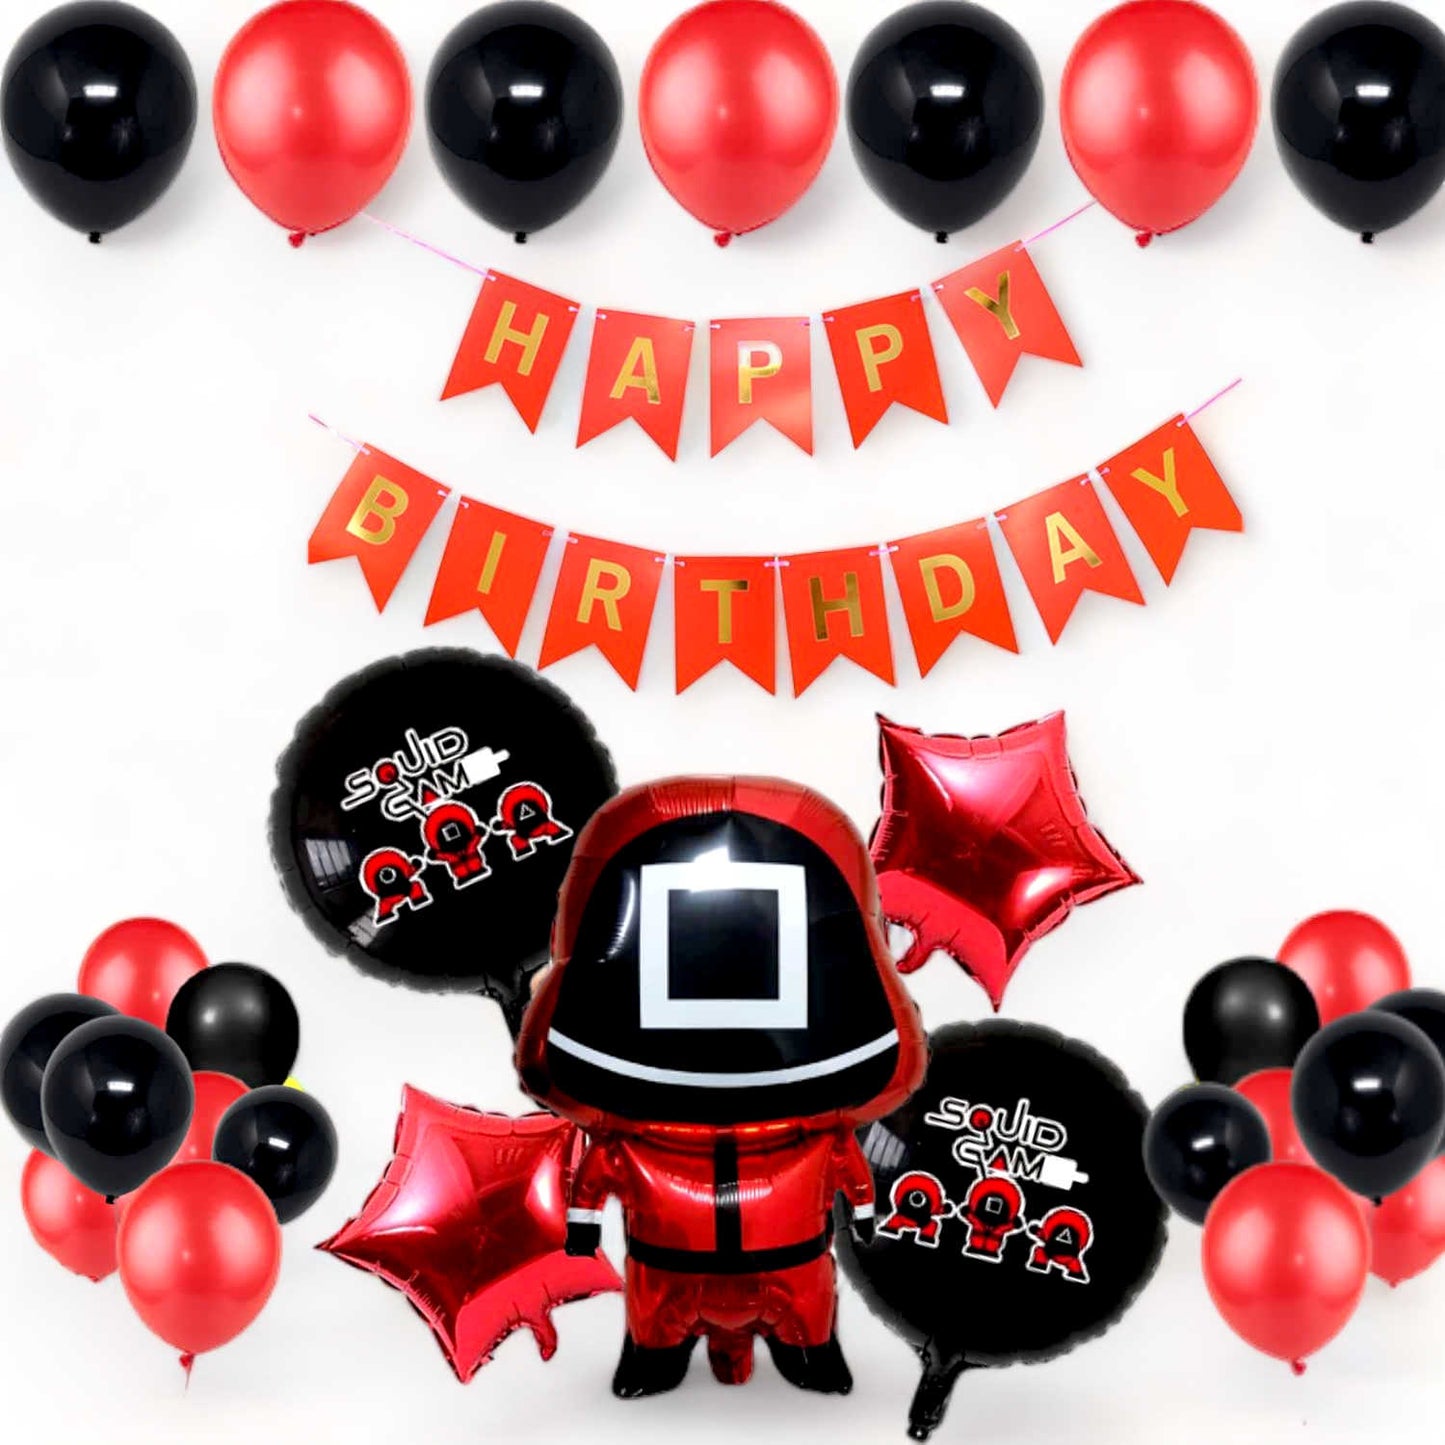 Squid Game Theme Happy Birthday Banner And Red-Black Balloon Set For Full Birthday Party DecorationSquid Game Theme Happy Birthday Banner And Red-Black Balloon Set For Full Birthday Party Decoration